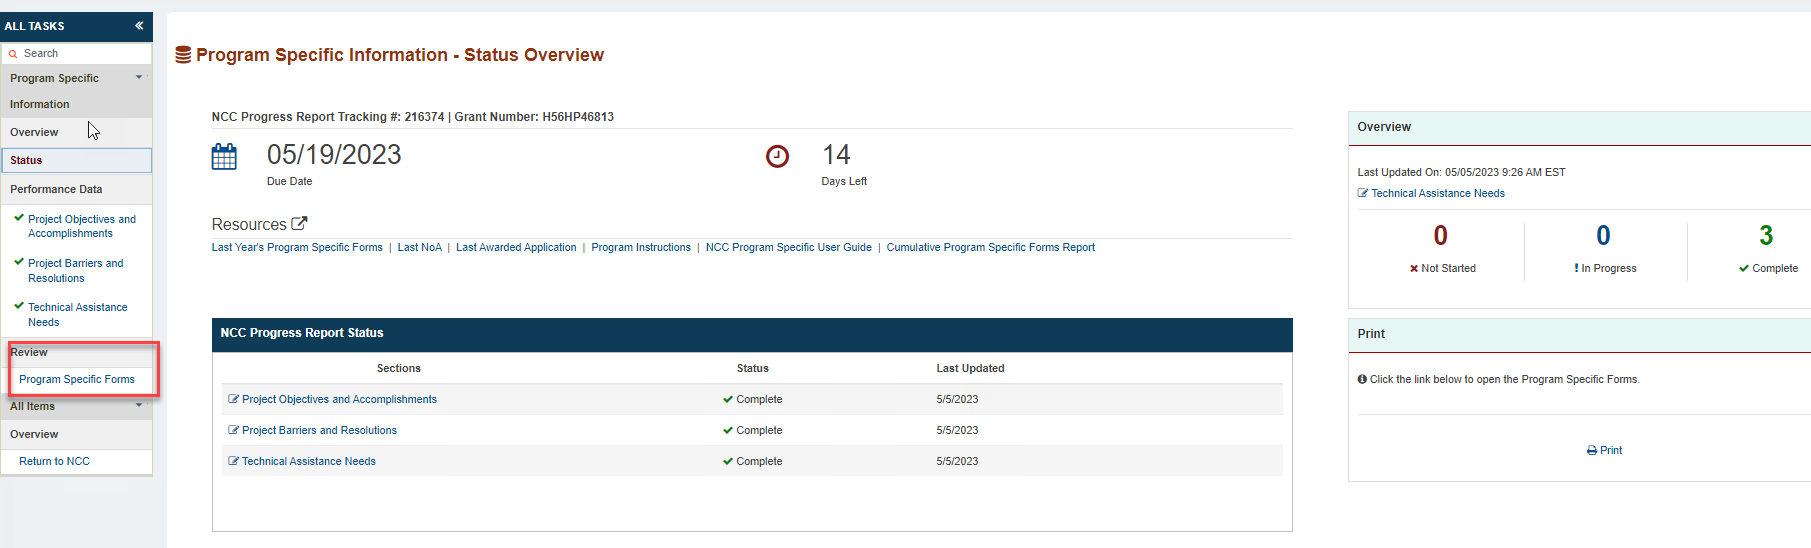 Screenshot of Program Specific Forms review page